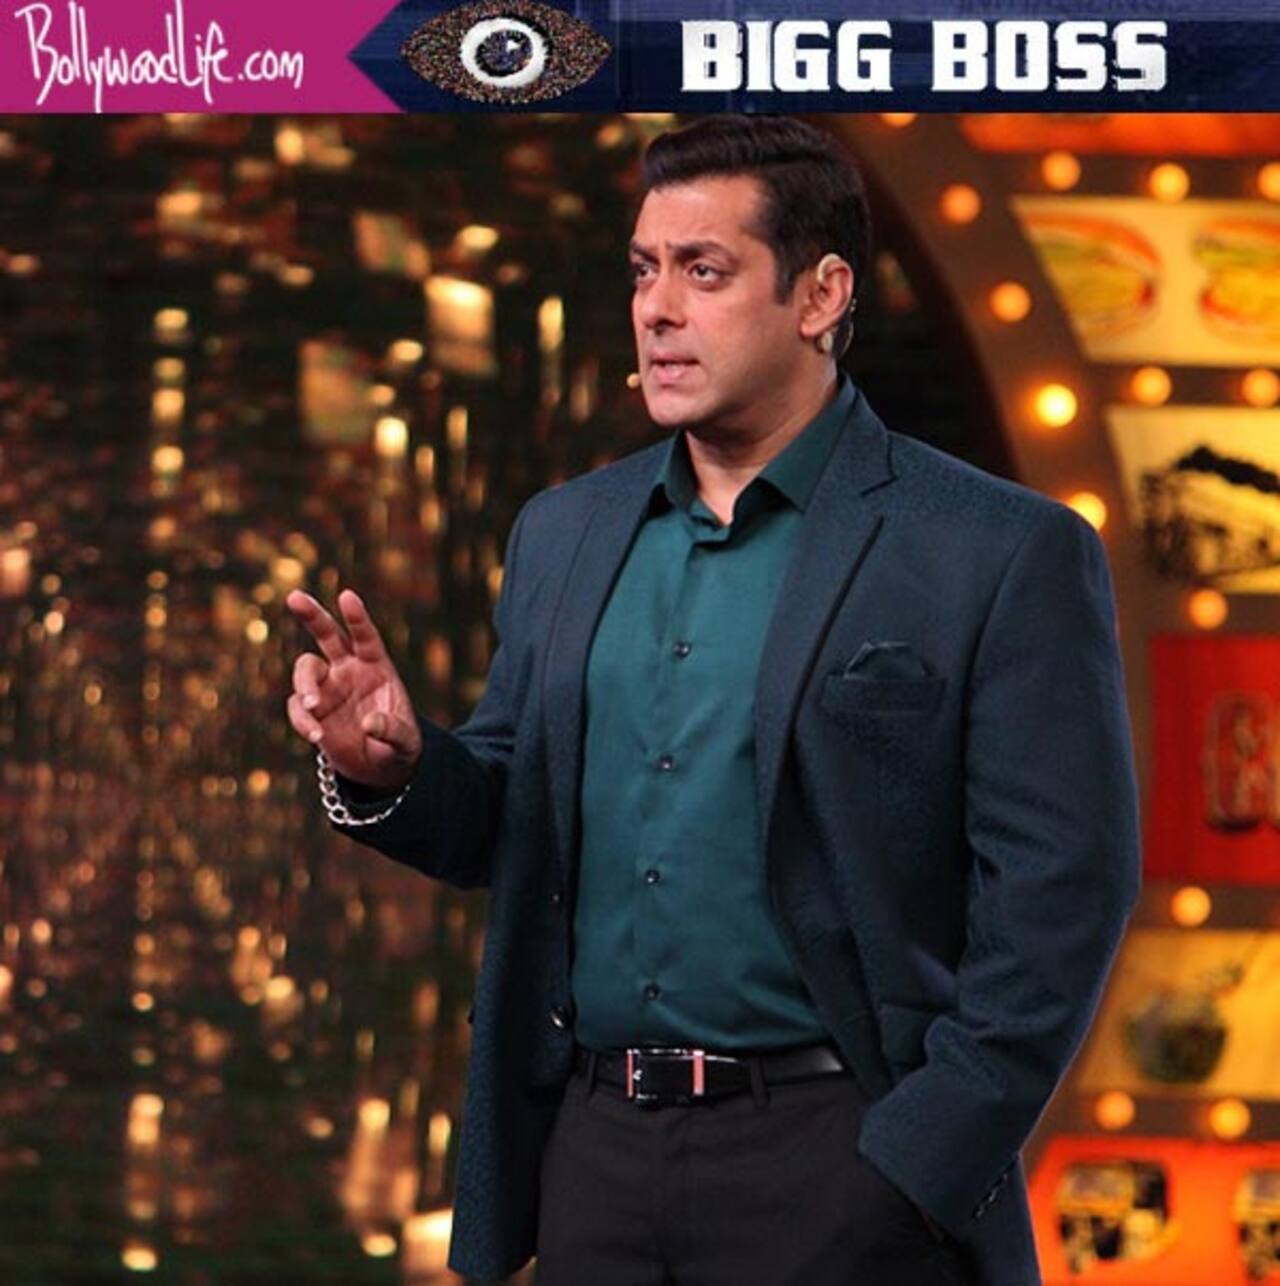 Bigg Boss Viewers Salman Khan - find out why - Bollywood News & Gossip, Reviews, Trailers & Videos at Bollywoodlife.com